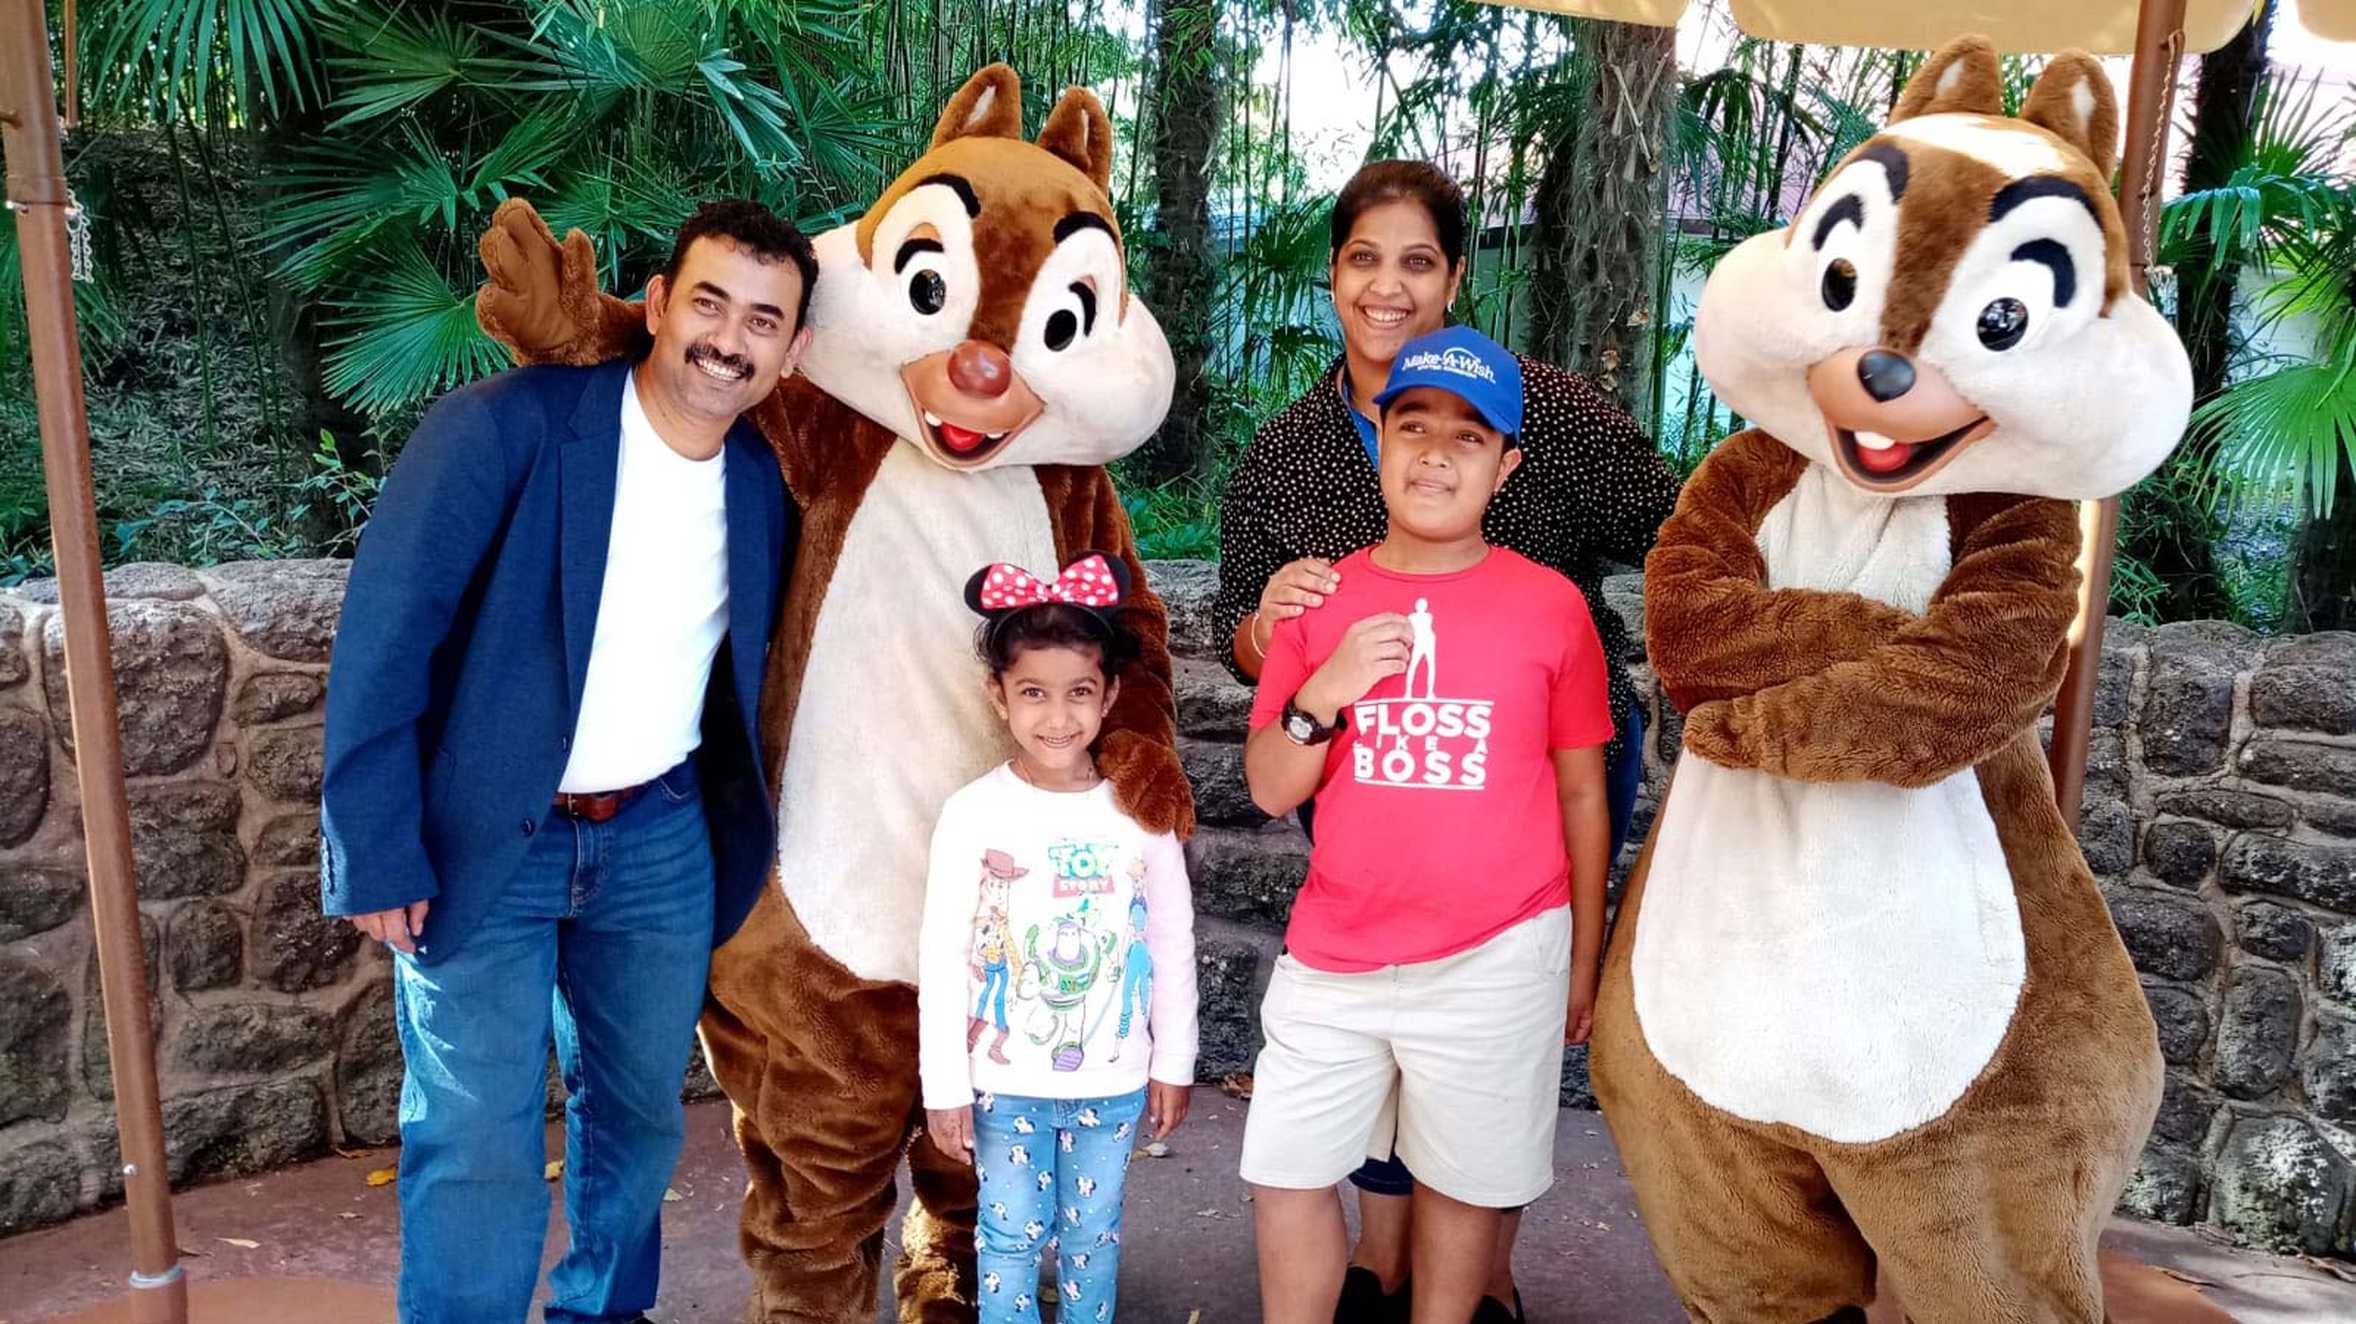 Abhi and his family posing with two chipmunk characters.